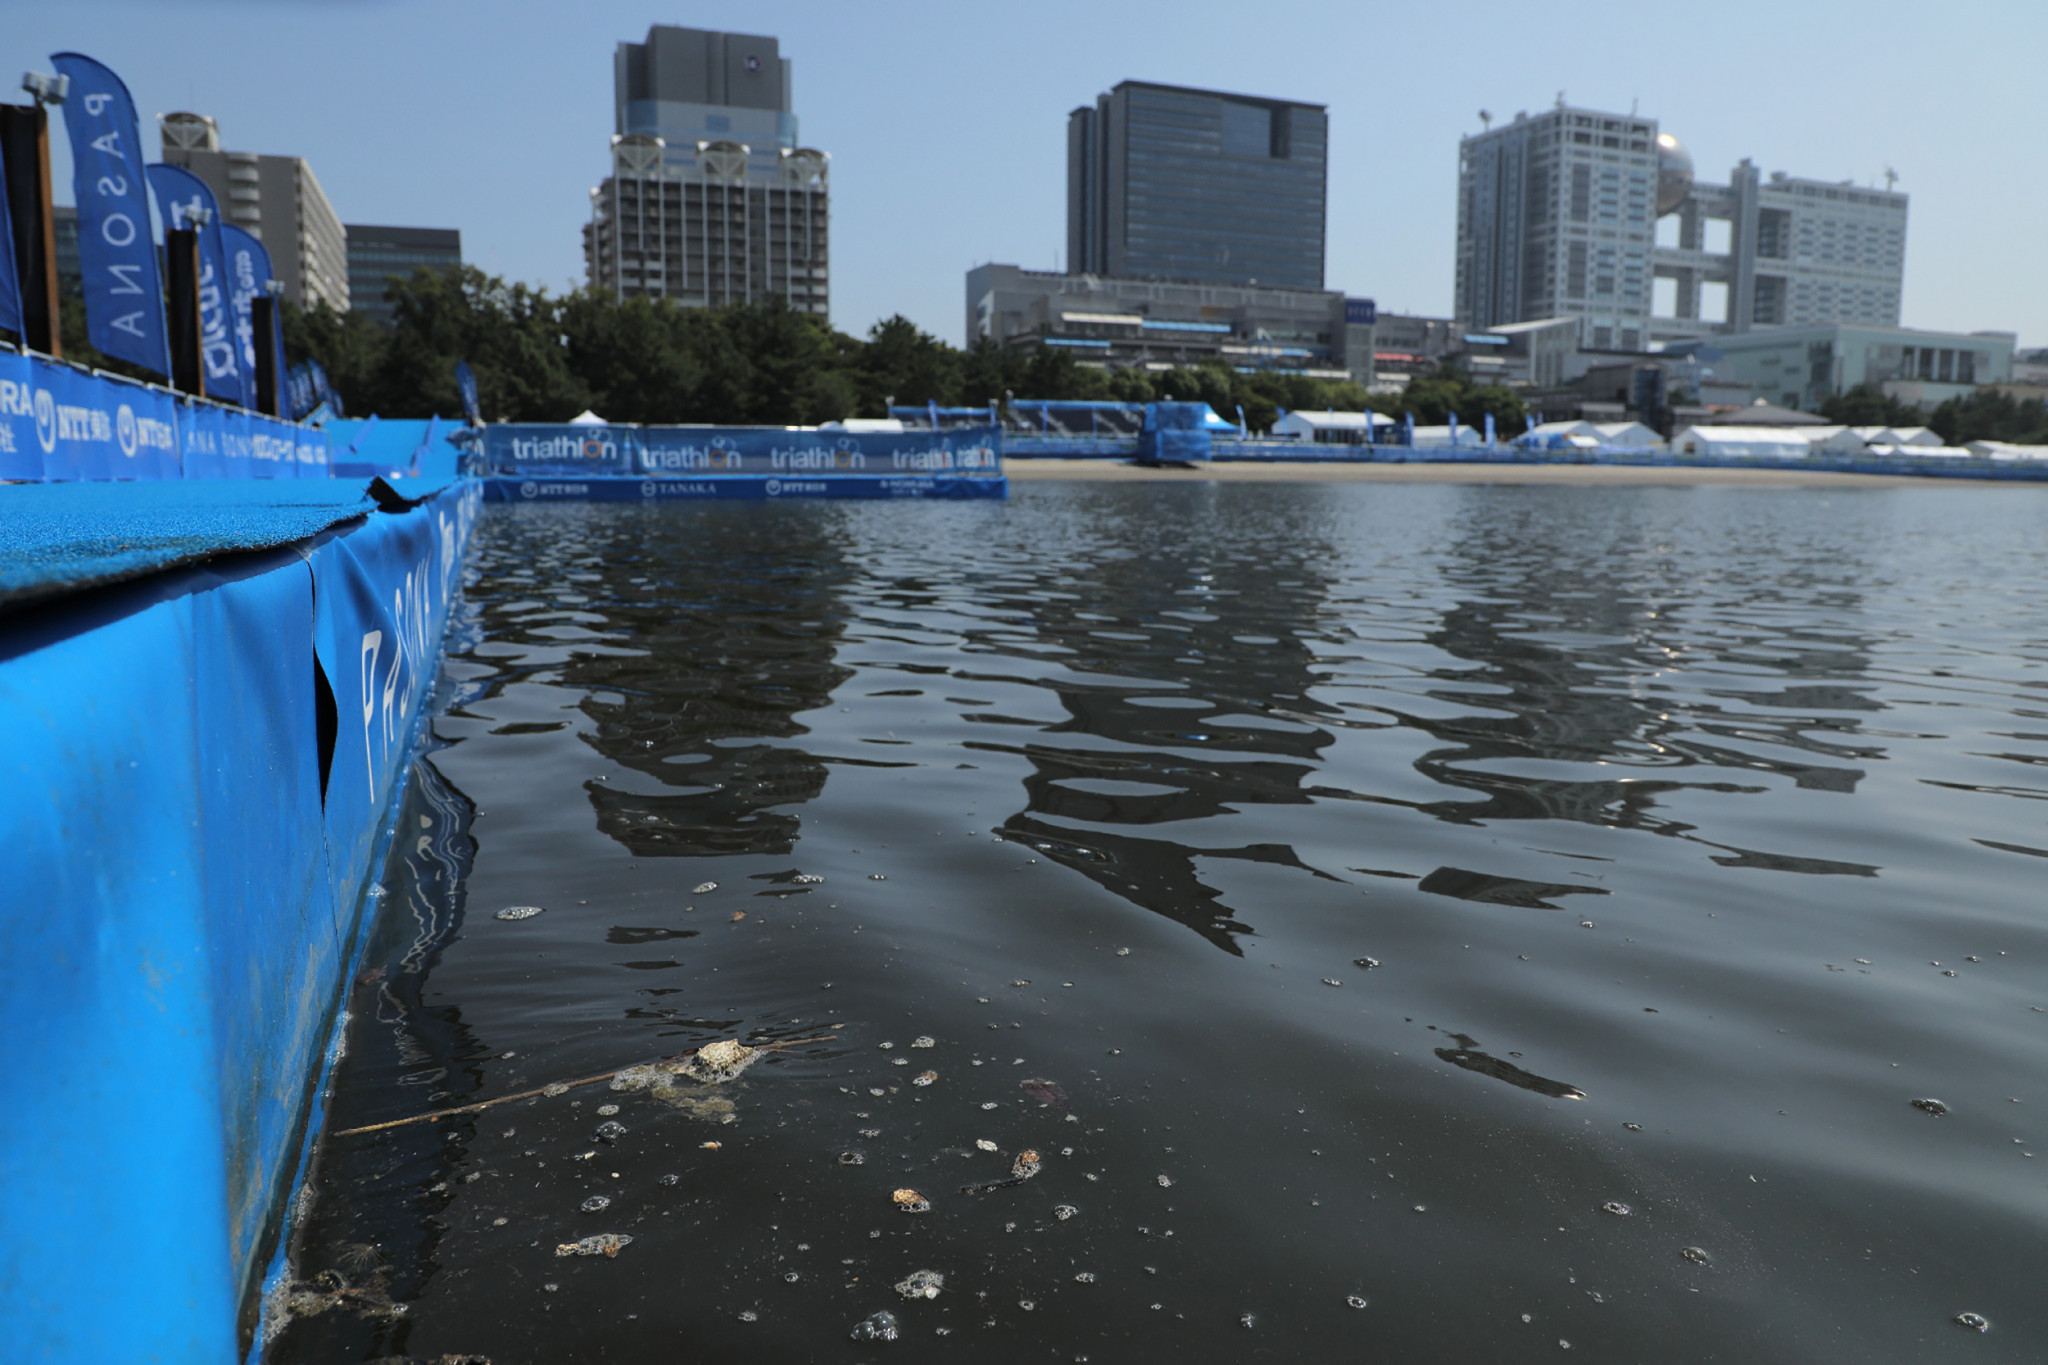 Tokyo 2020 to increase water quality efforts to ensure athlete safety at Olympic Games